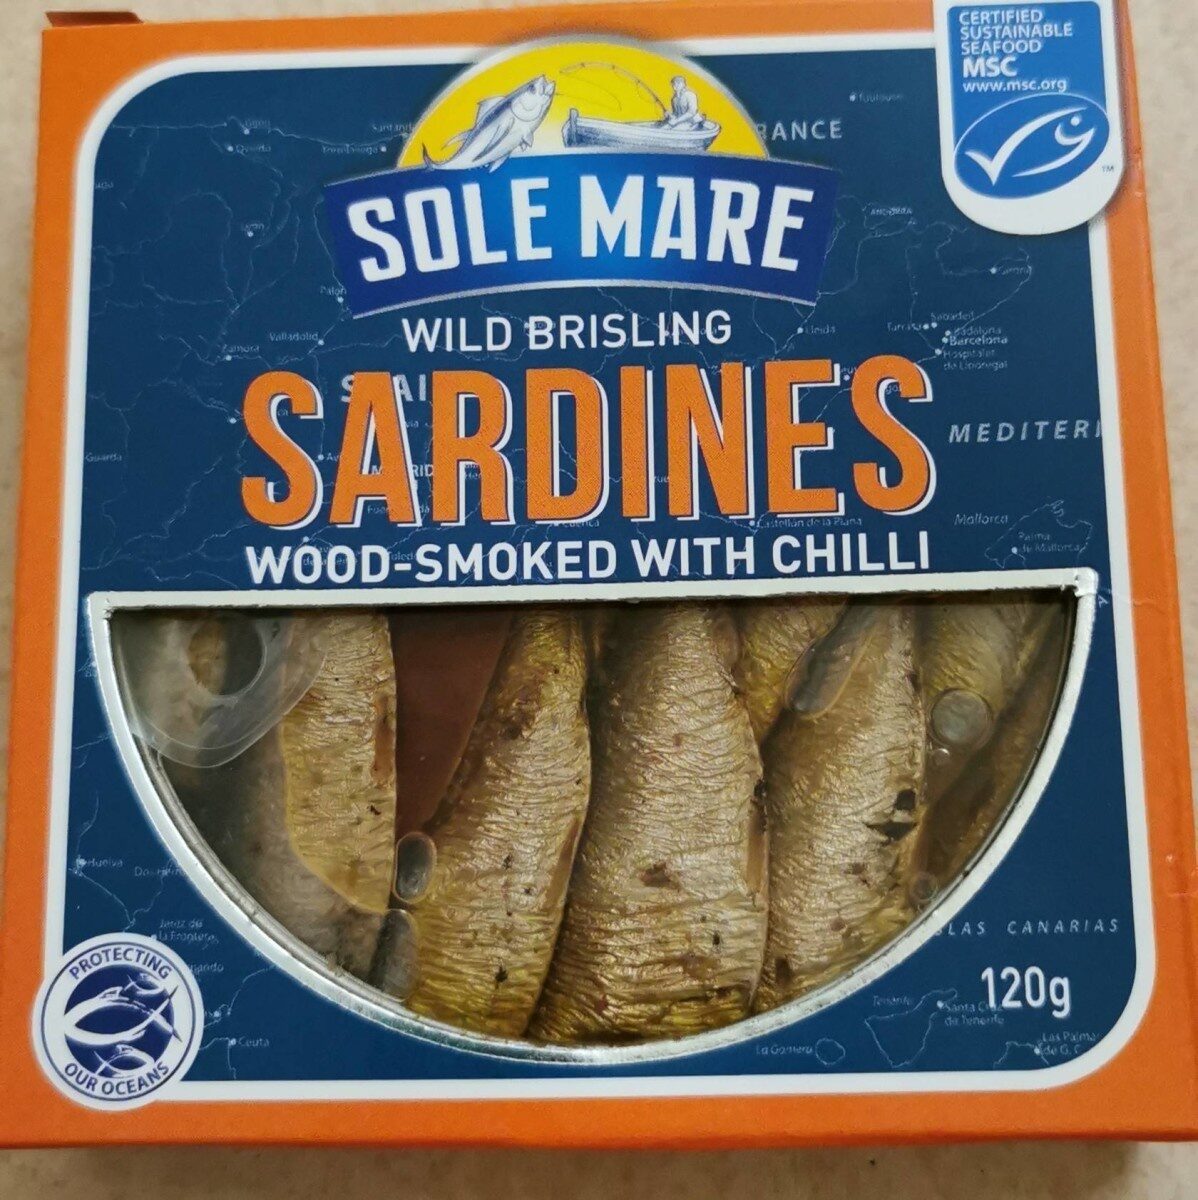 Sardines wood smoked with chilli - Product - en